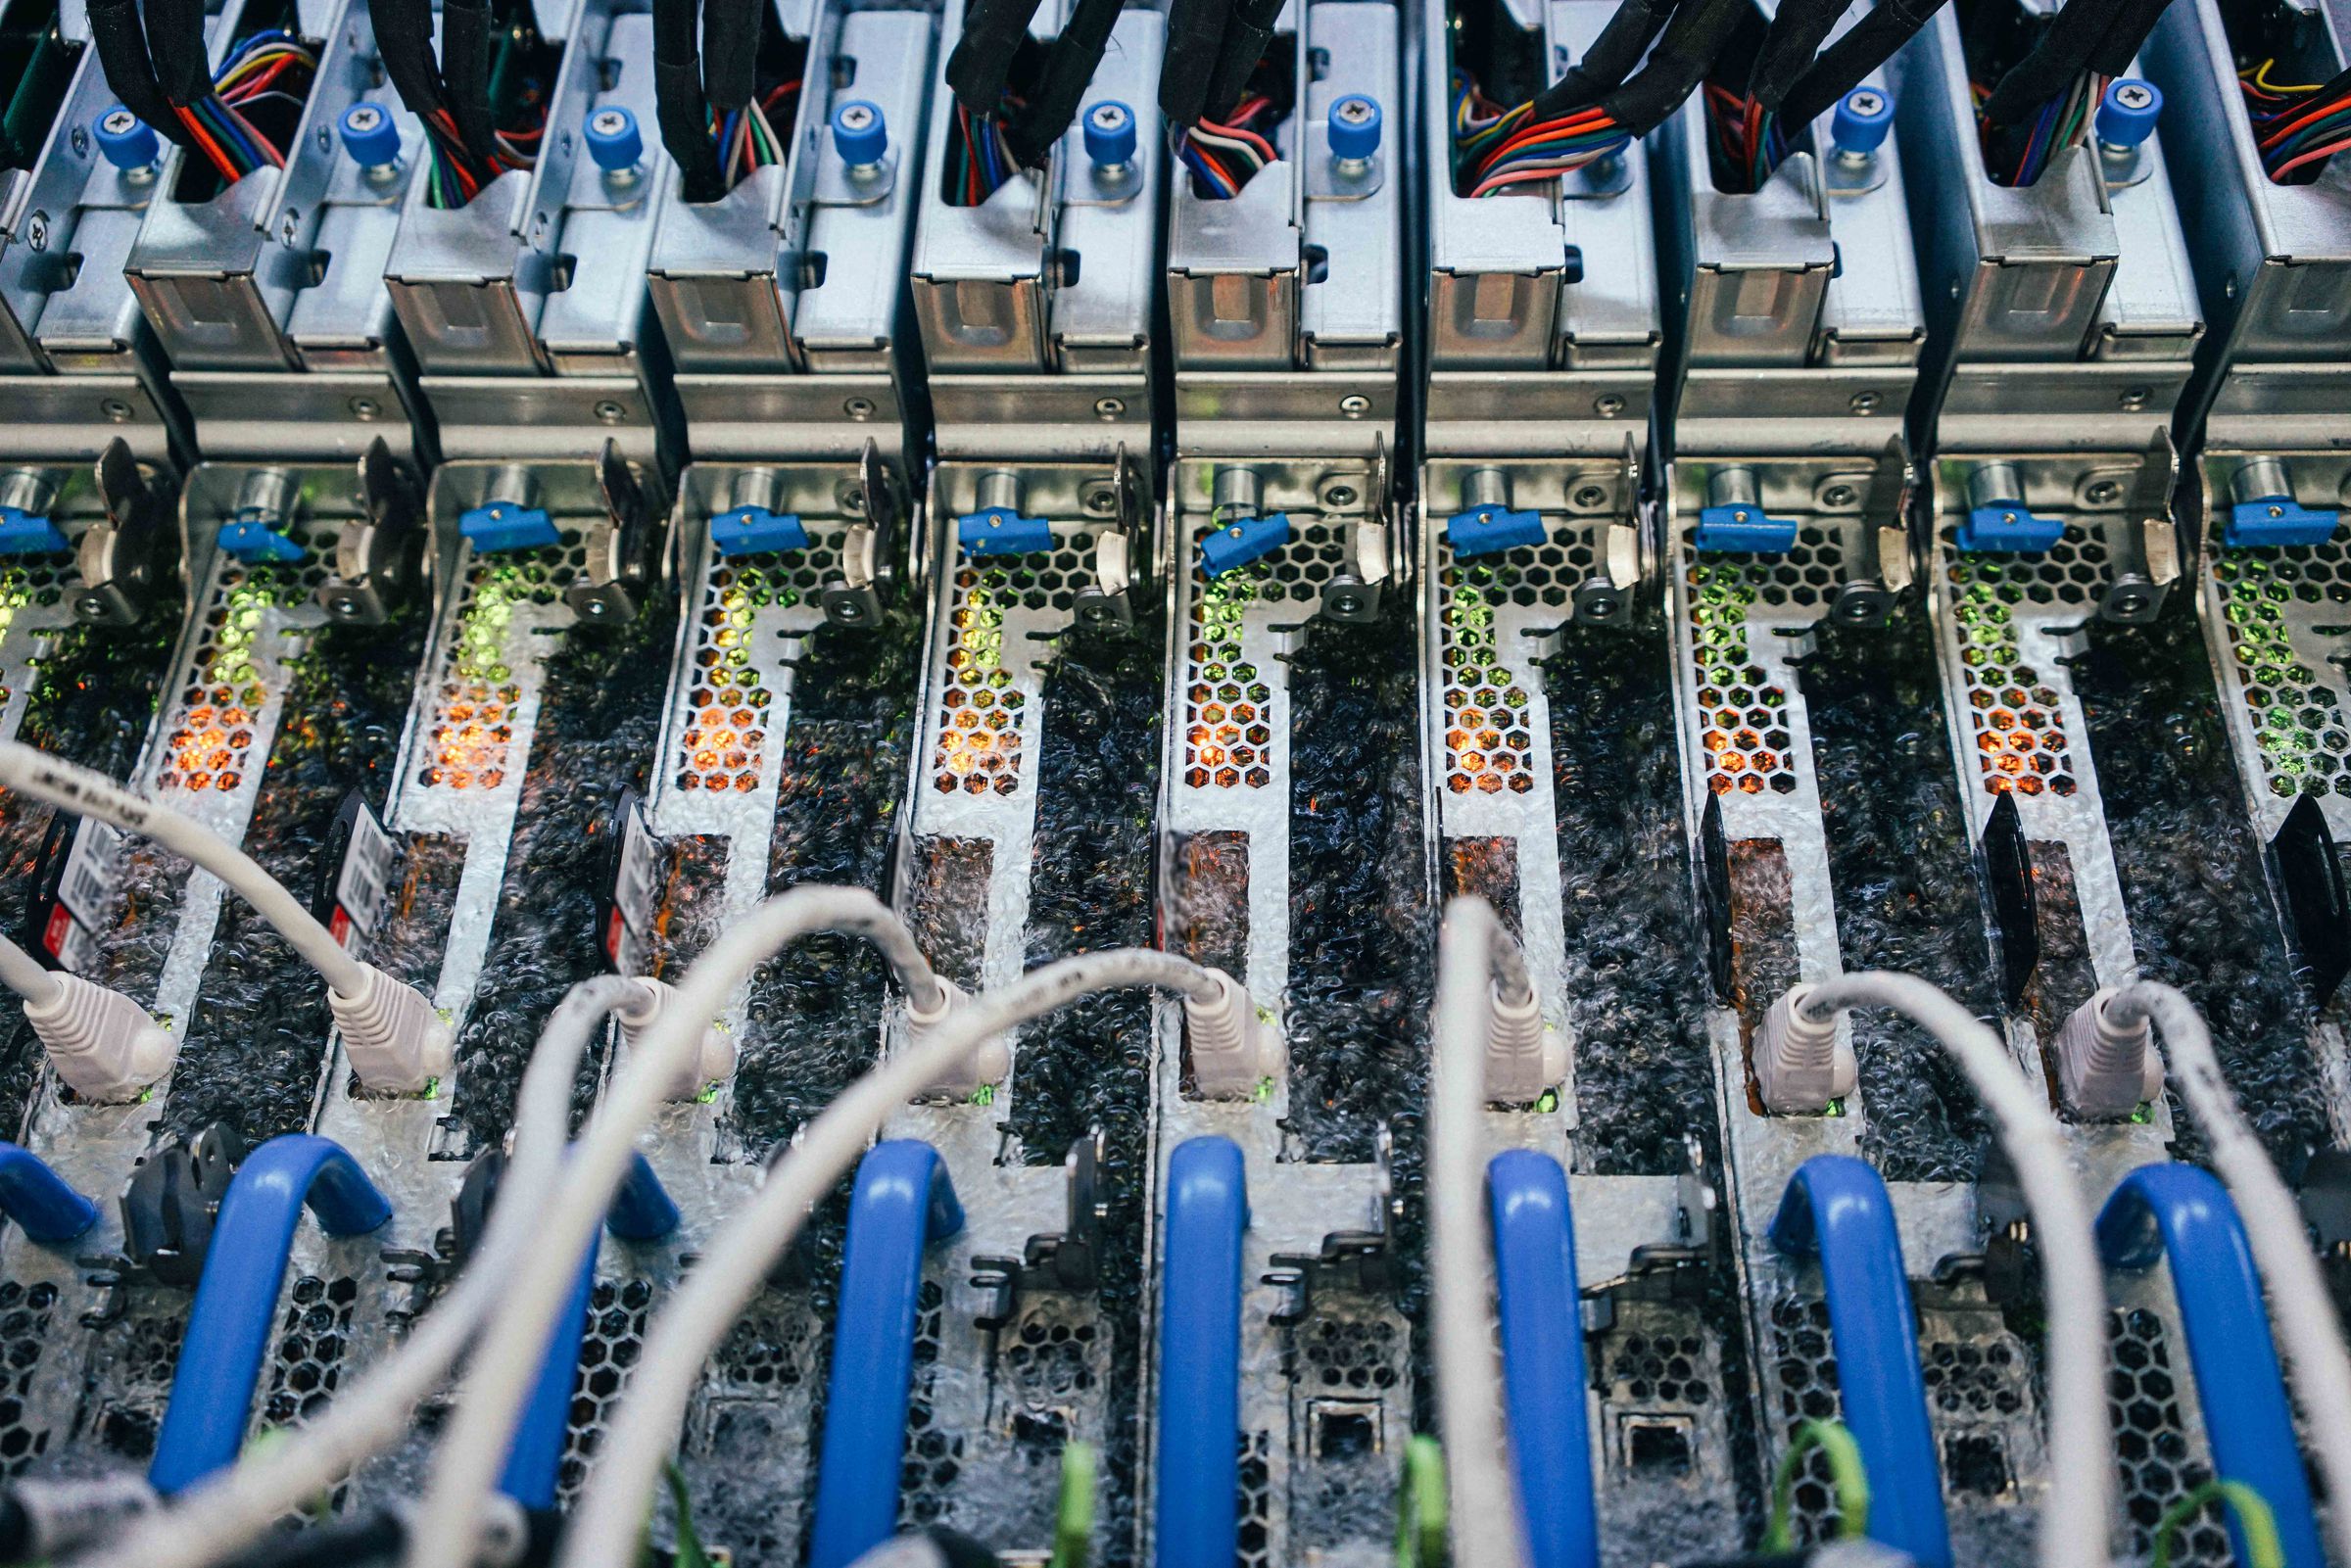 Boiling liquid surrounds servers at a Microsoft data center.